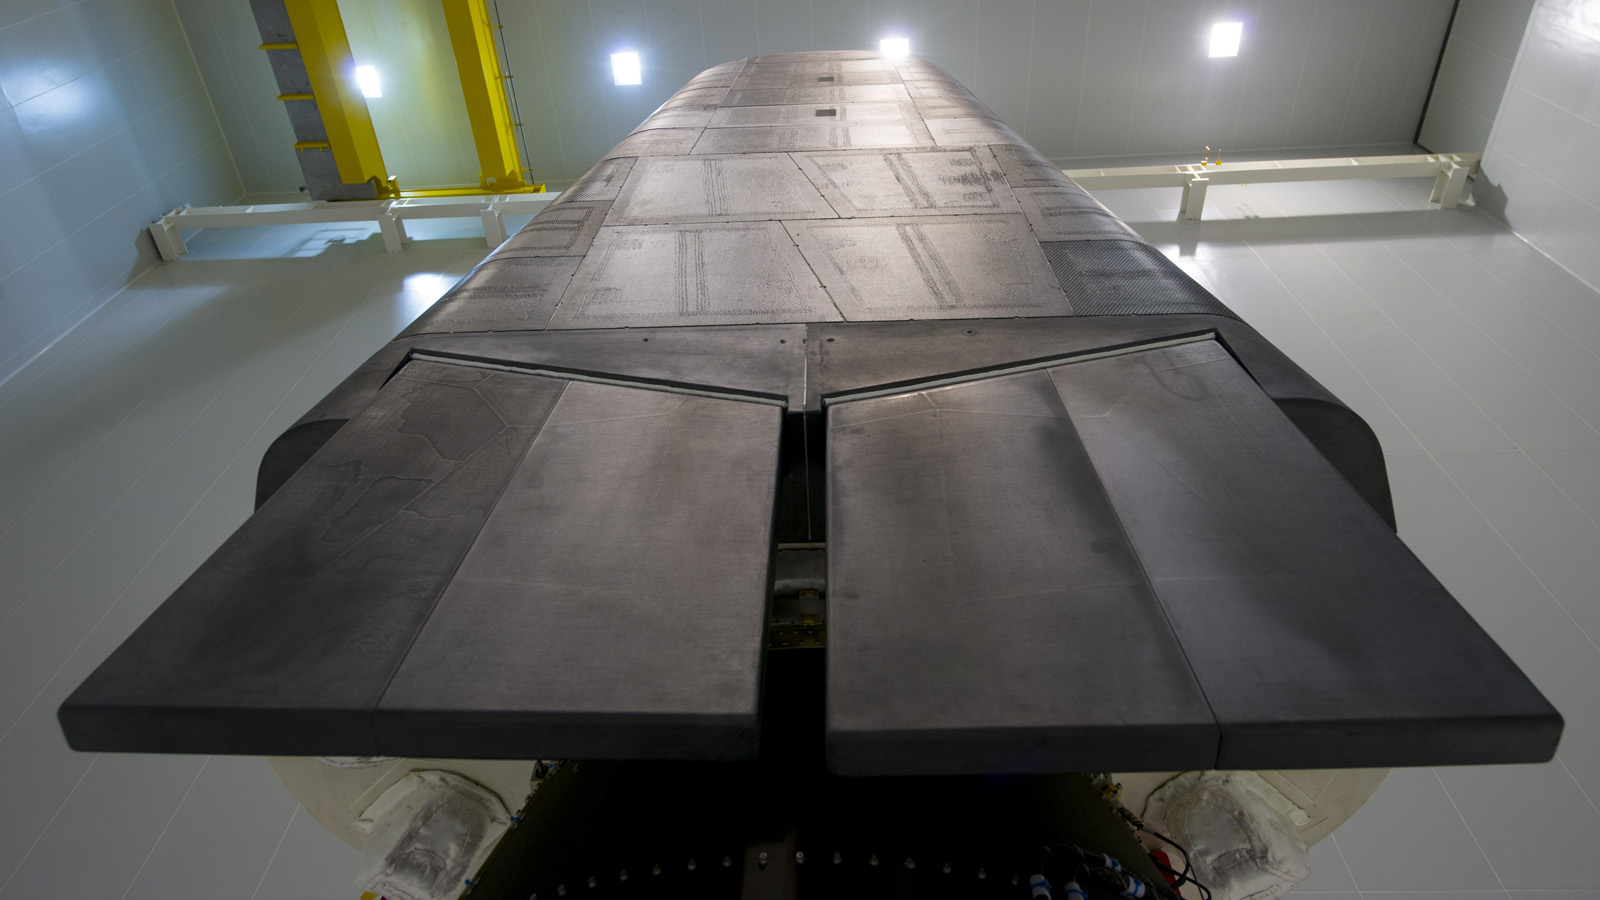 Monster Machines: This Gleaming Monolith May Spawn The Next Space Shuttle